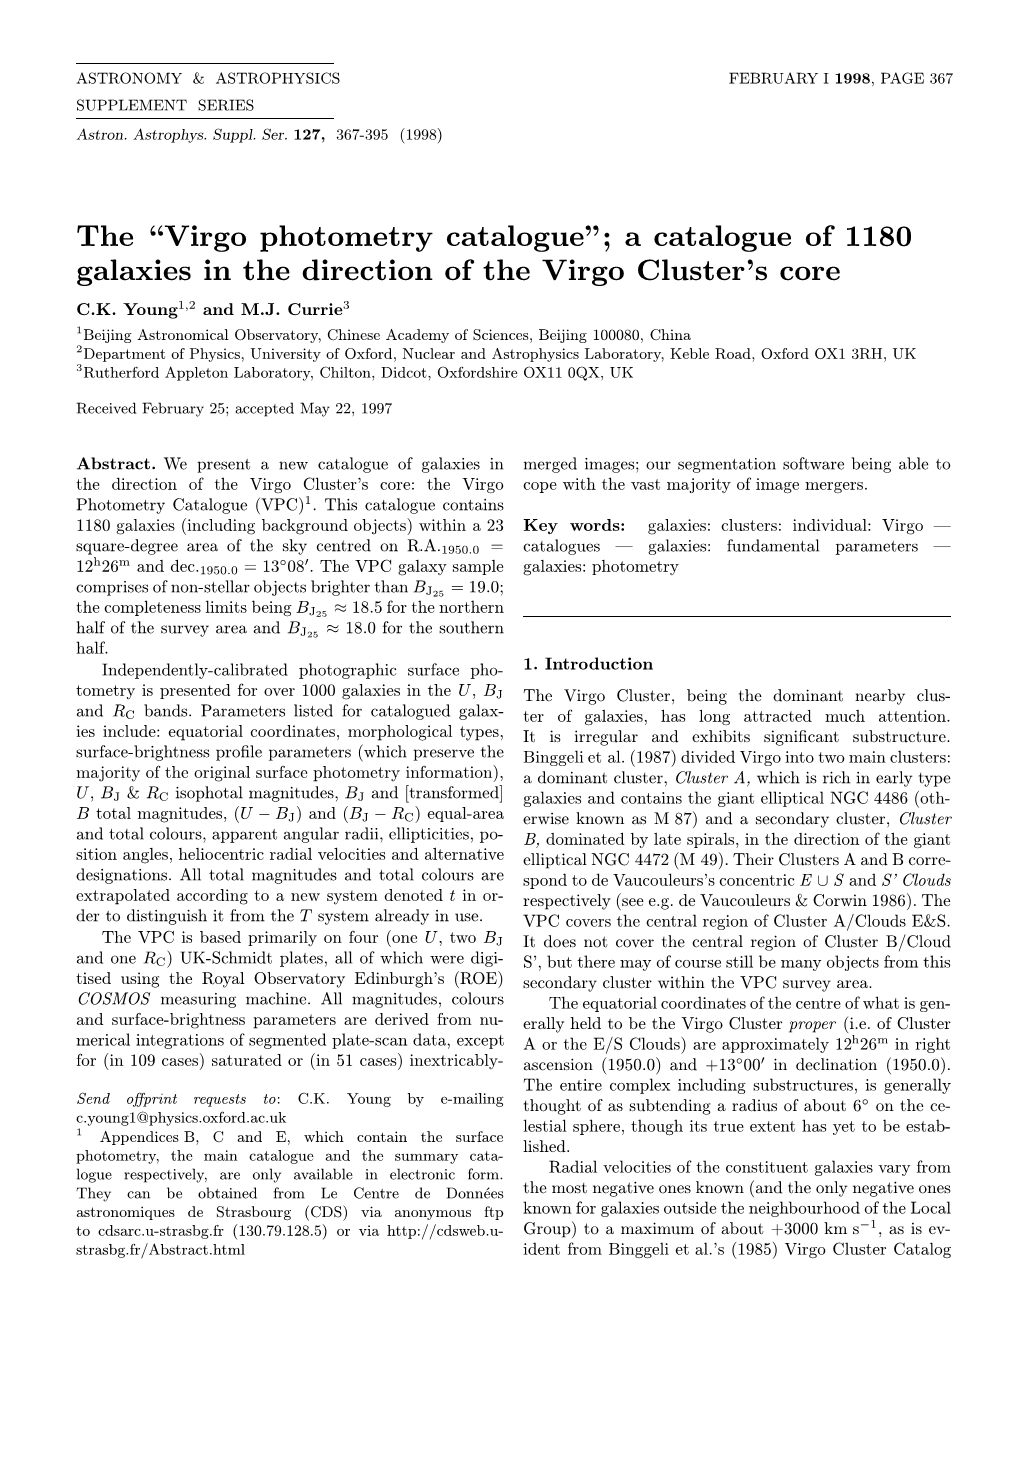 A Catalogue of 1180 Galaxies in the Direction of the Virgo Cluster's Core